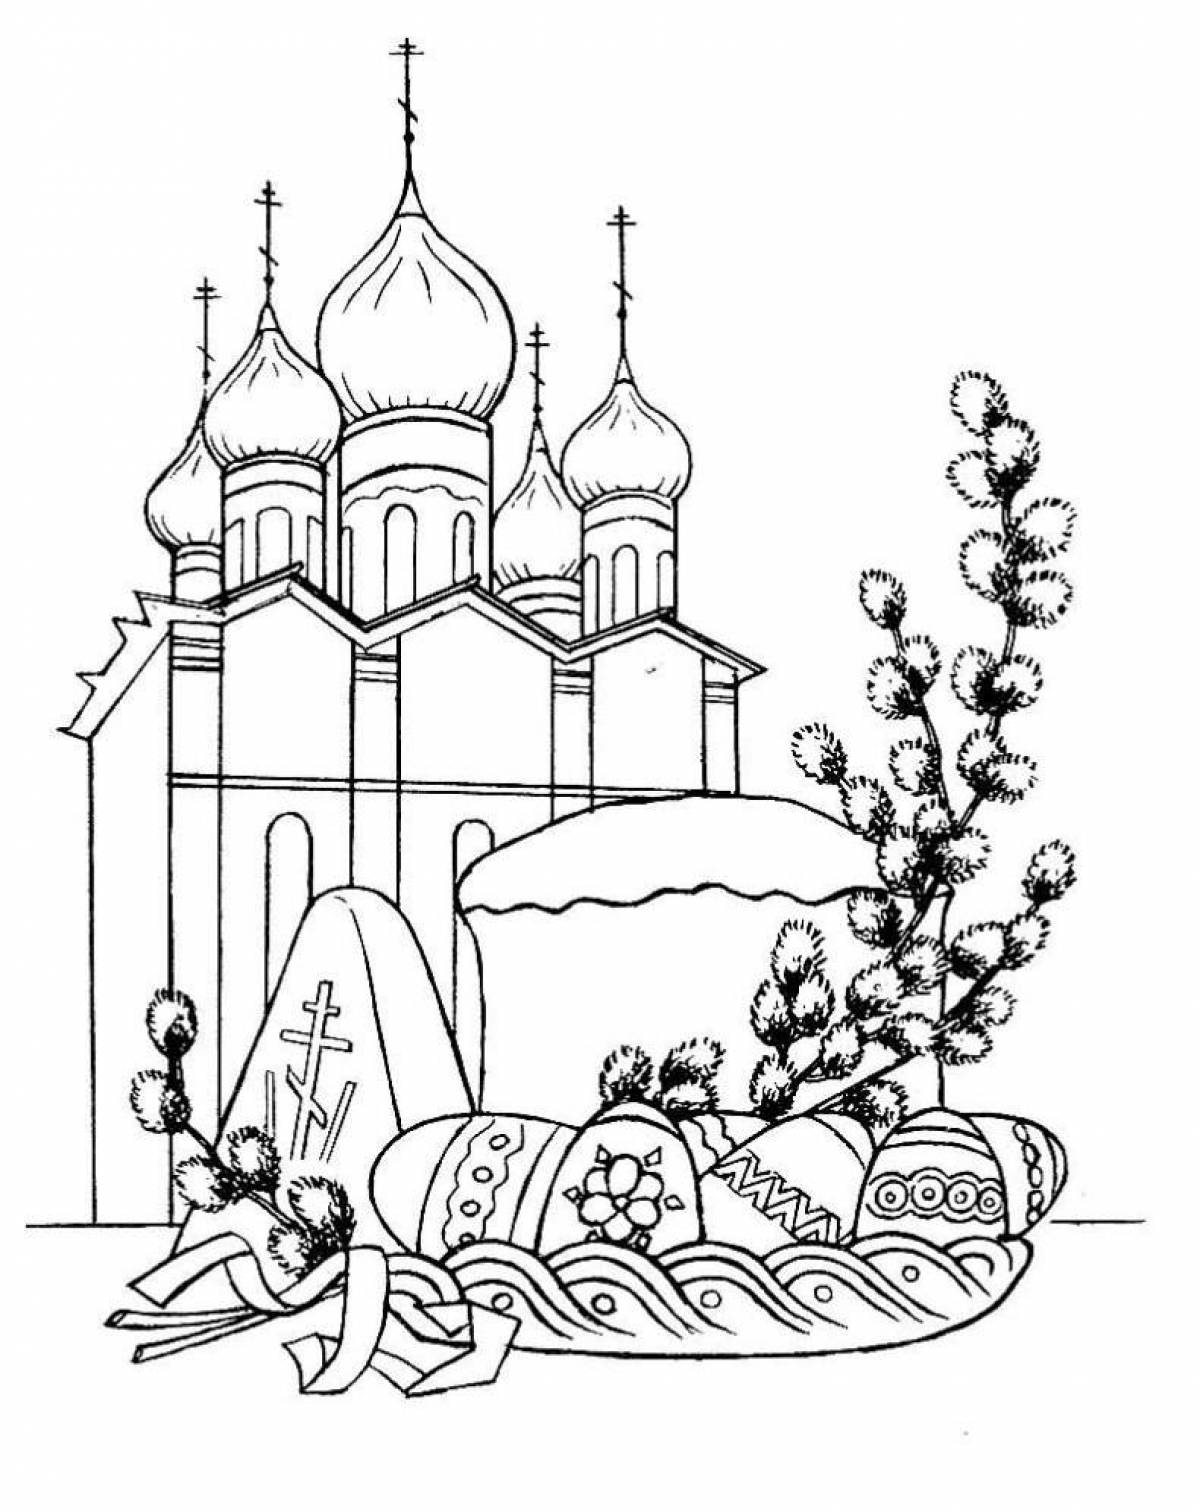 Coloring page nice church